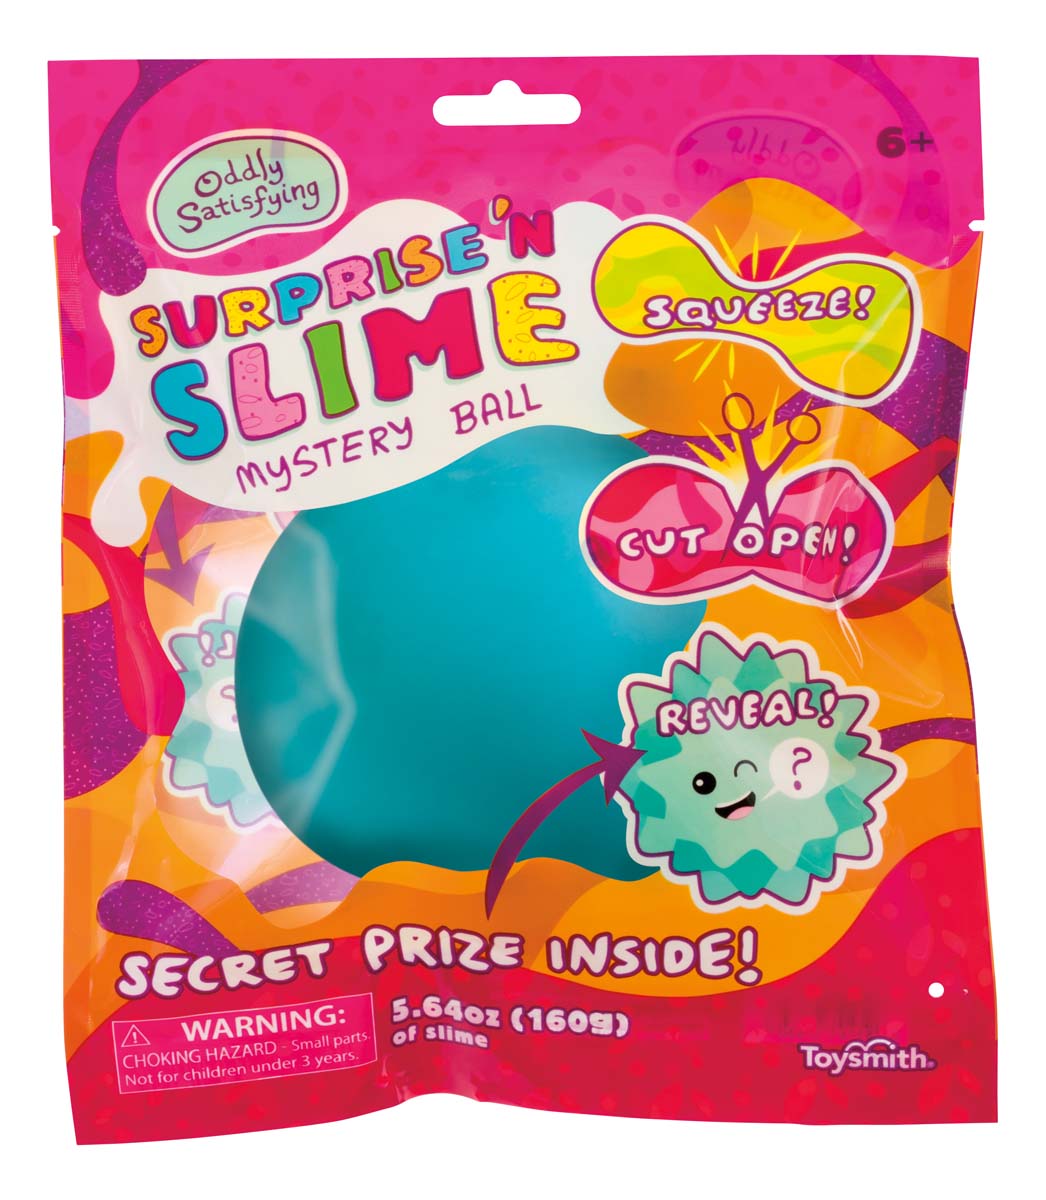 Oddly Satisfying Surprise 'N Slime Mystery Ball